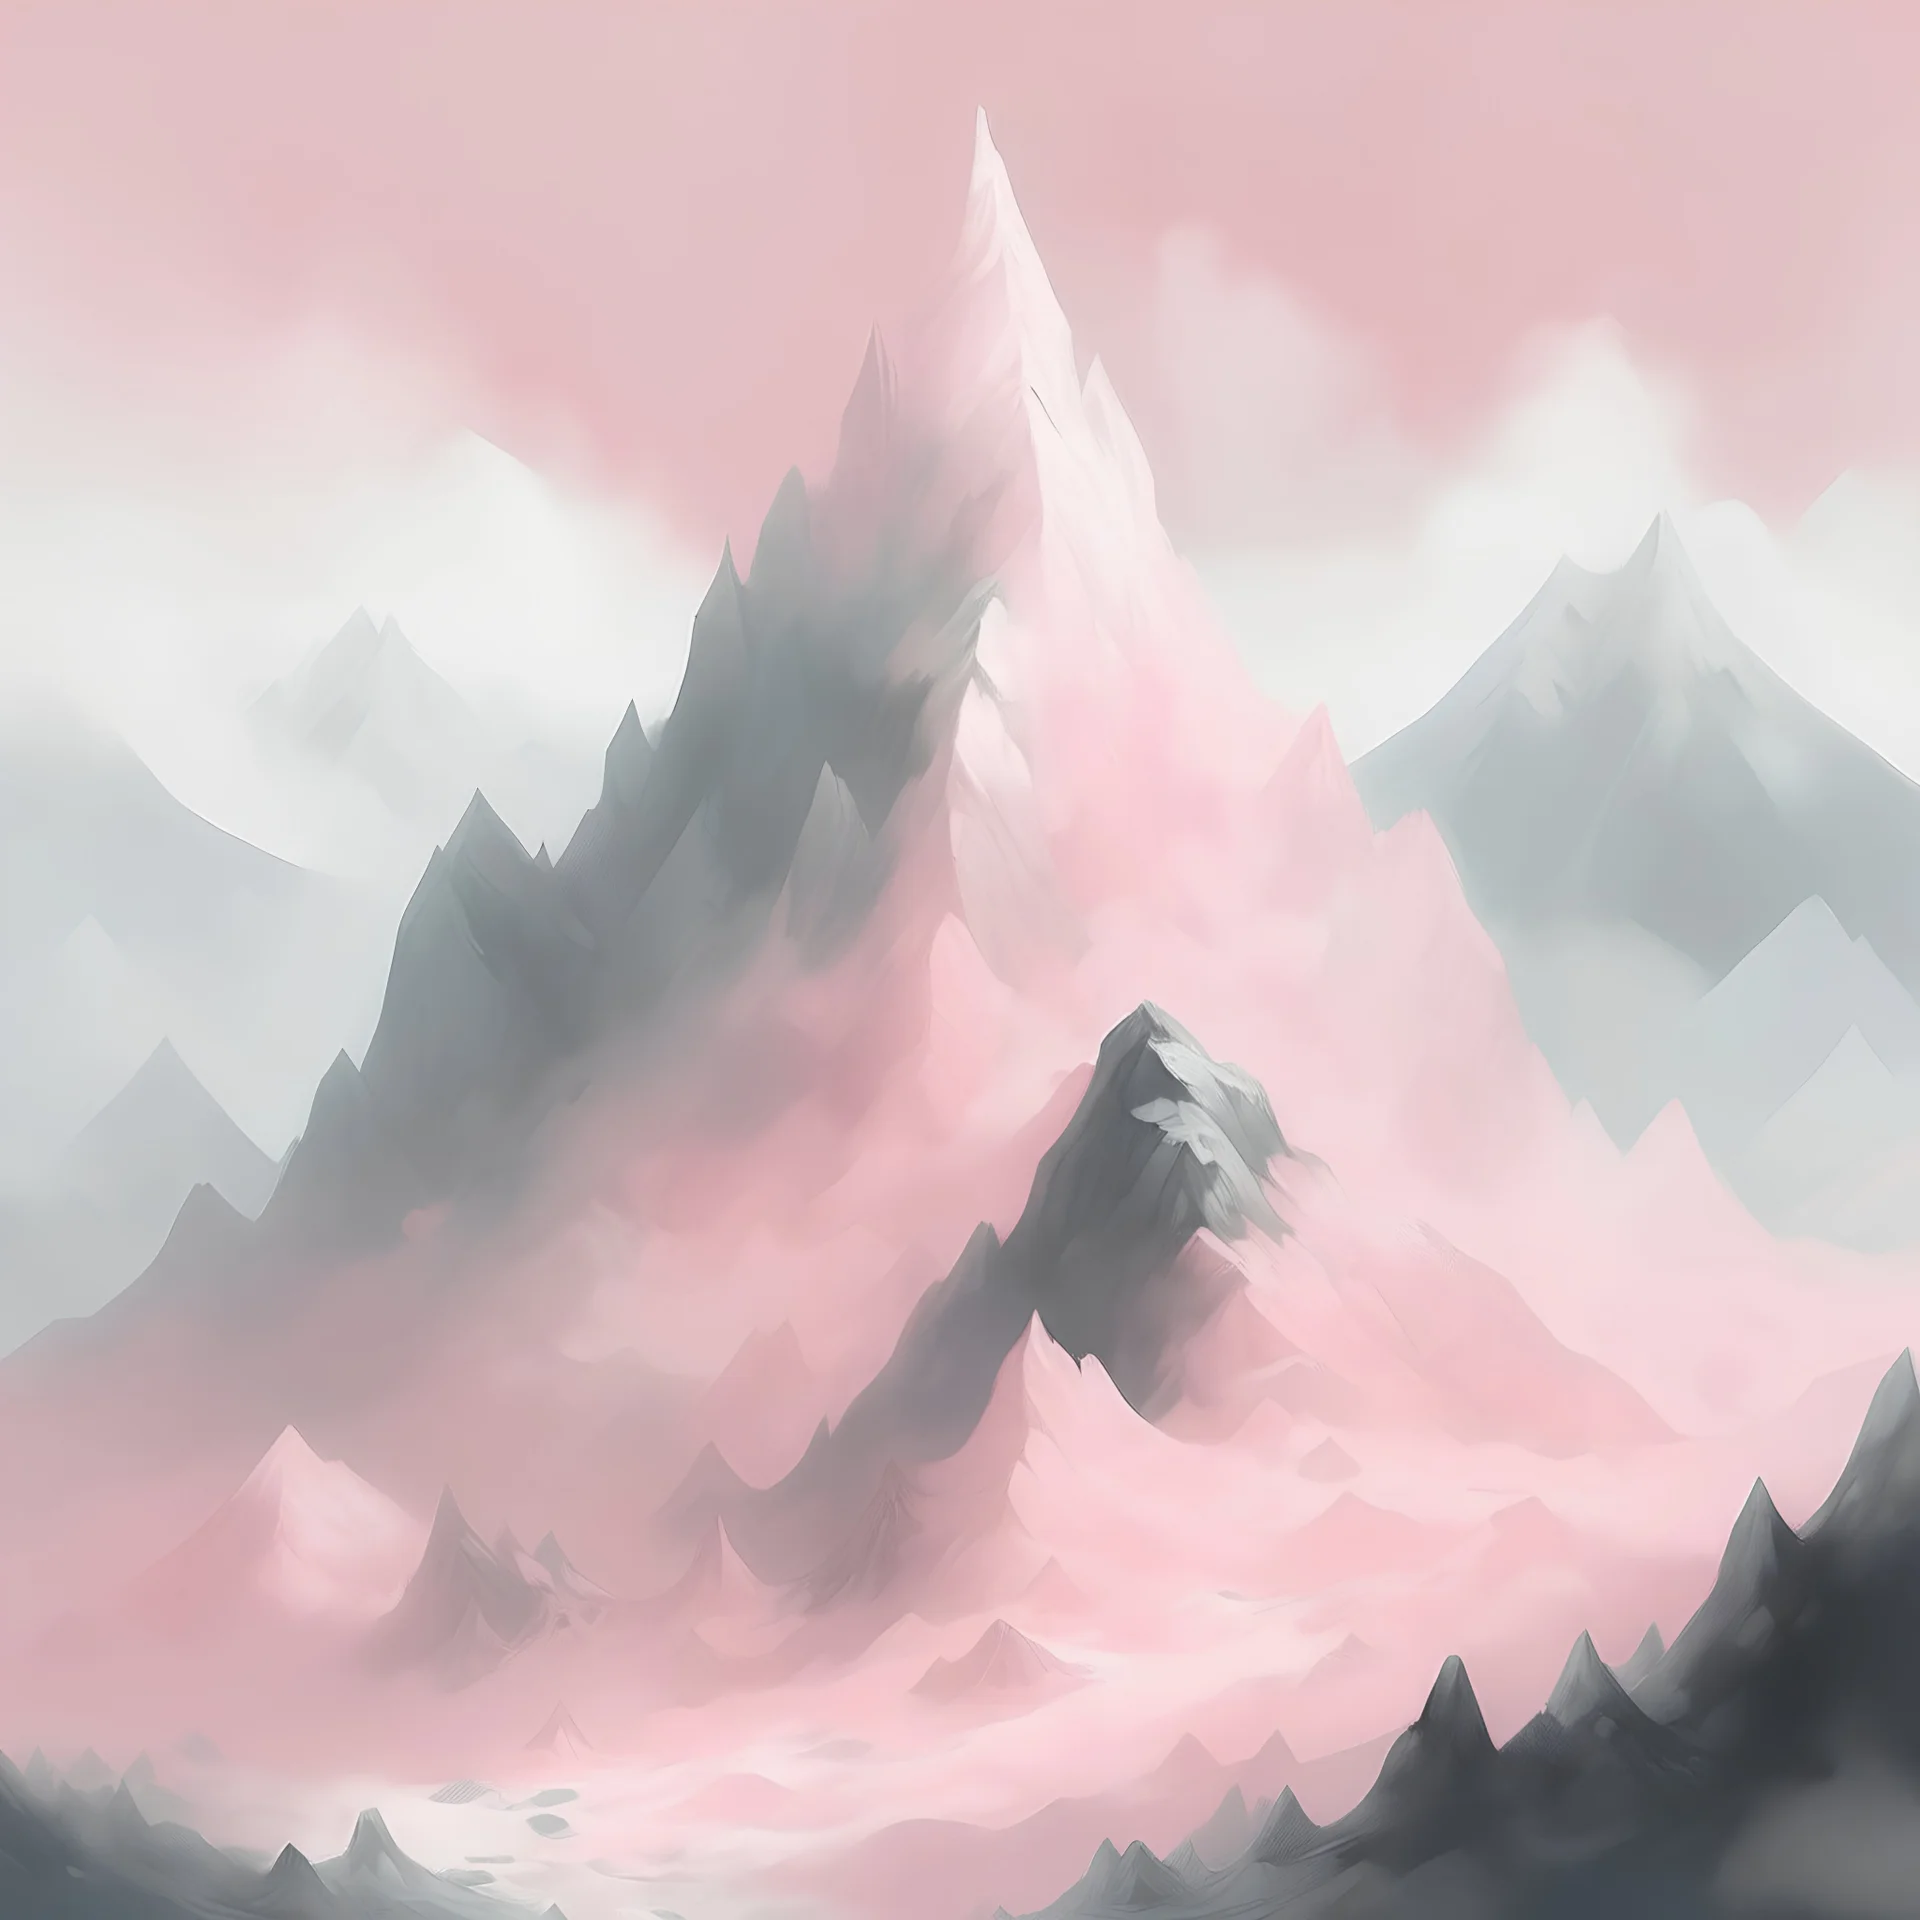 A pale pink mountain filled with ghosts painted by Zosan